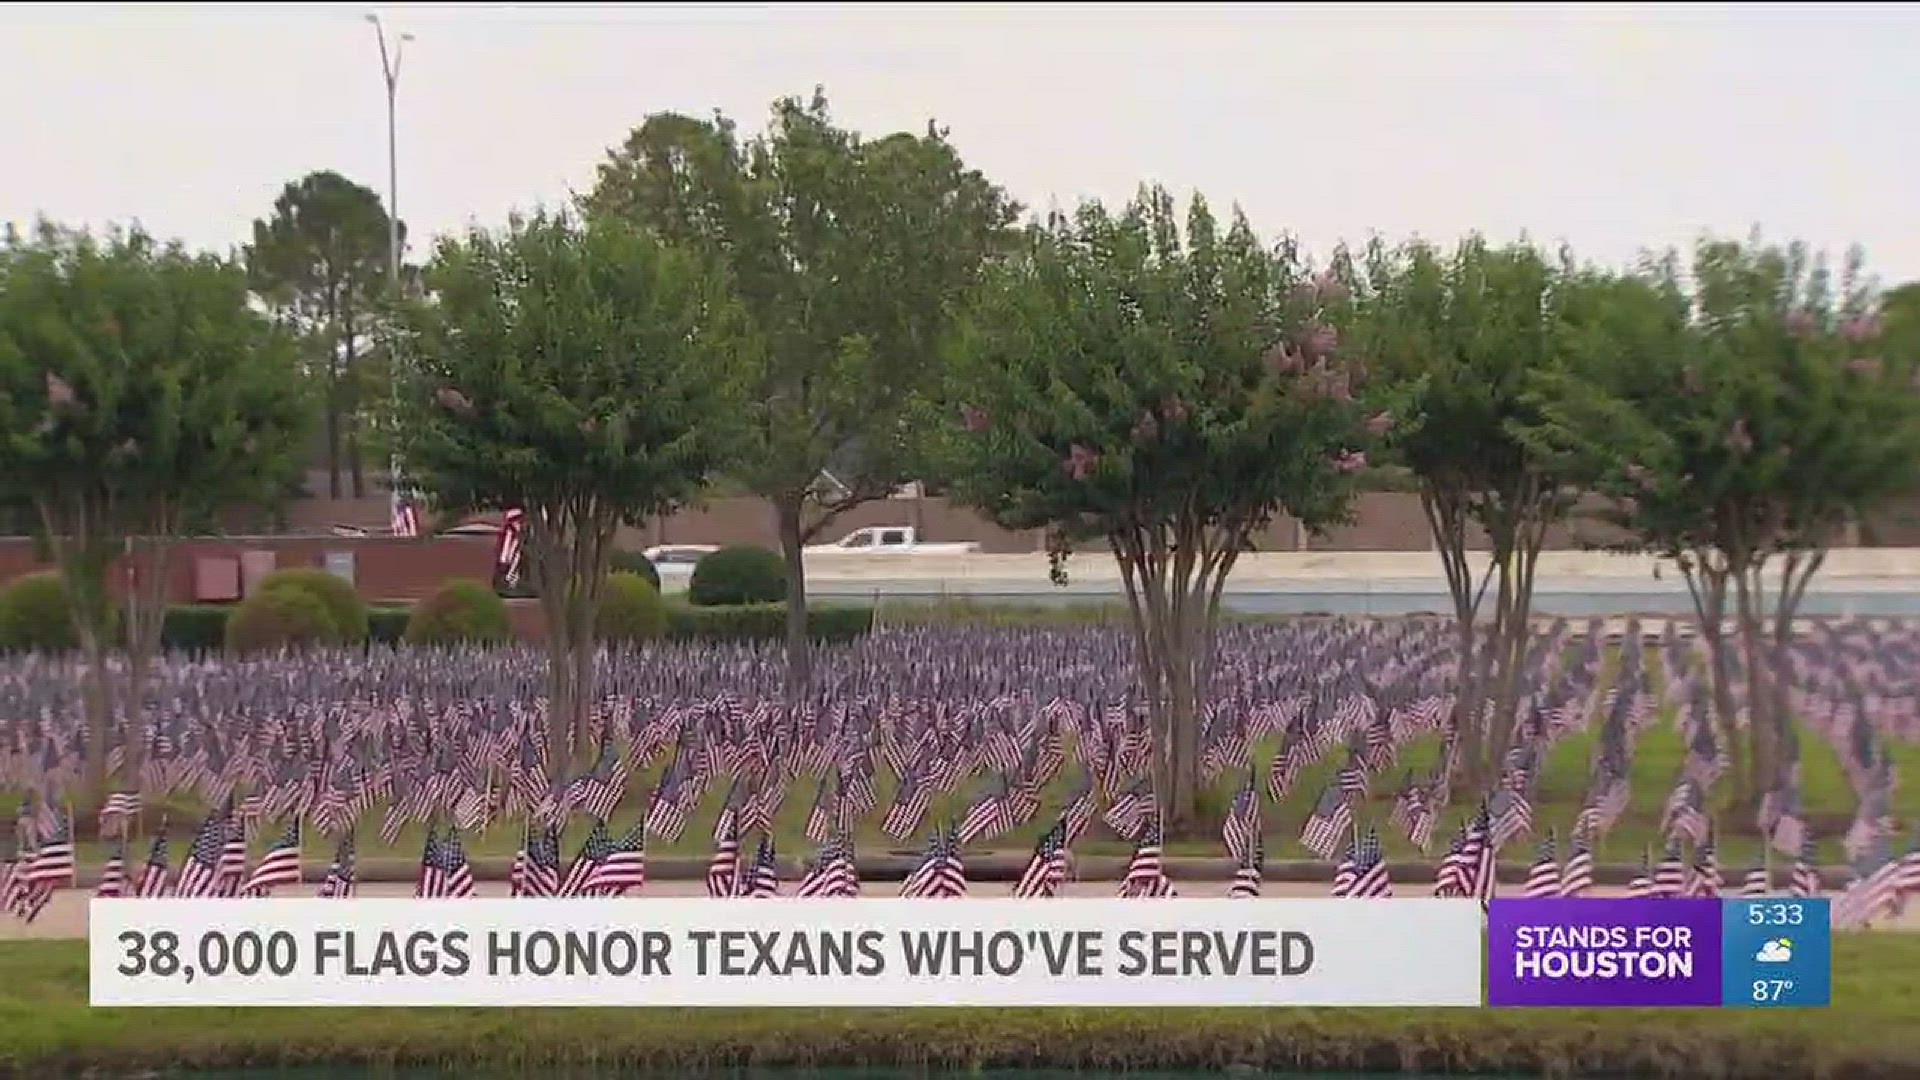 See the stunning Memorial Day display set up outside the Sagemont Church in southeast Houston. Organizers set out more than 38,000 flags to honor the lives of Texans who served and sacrificed in every conflict dating back to World War I.